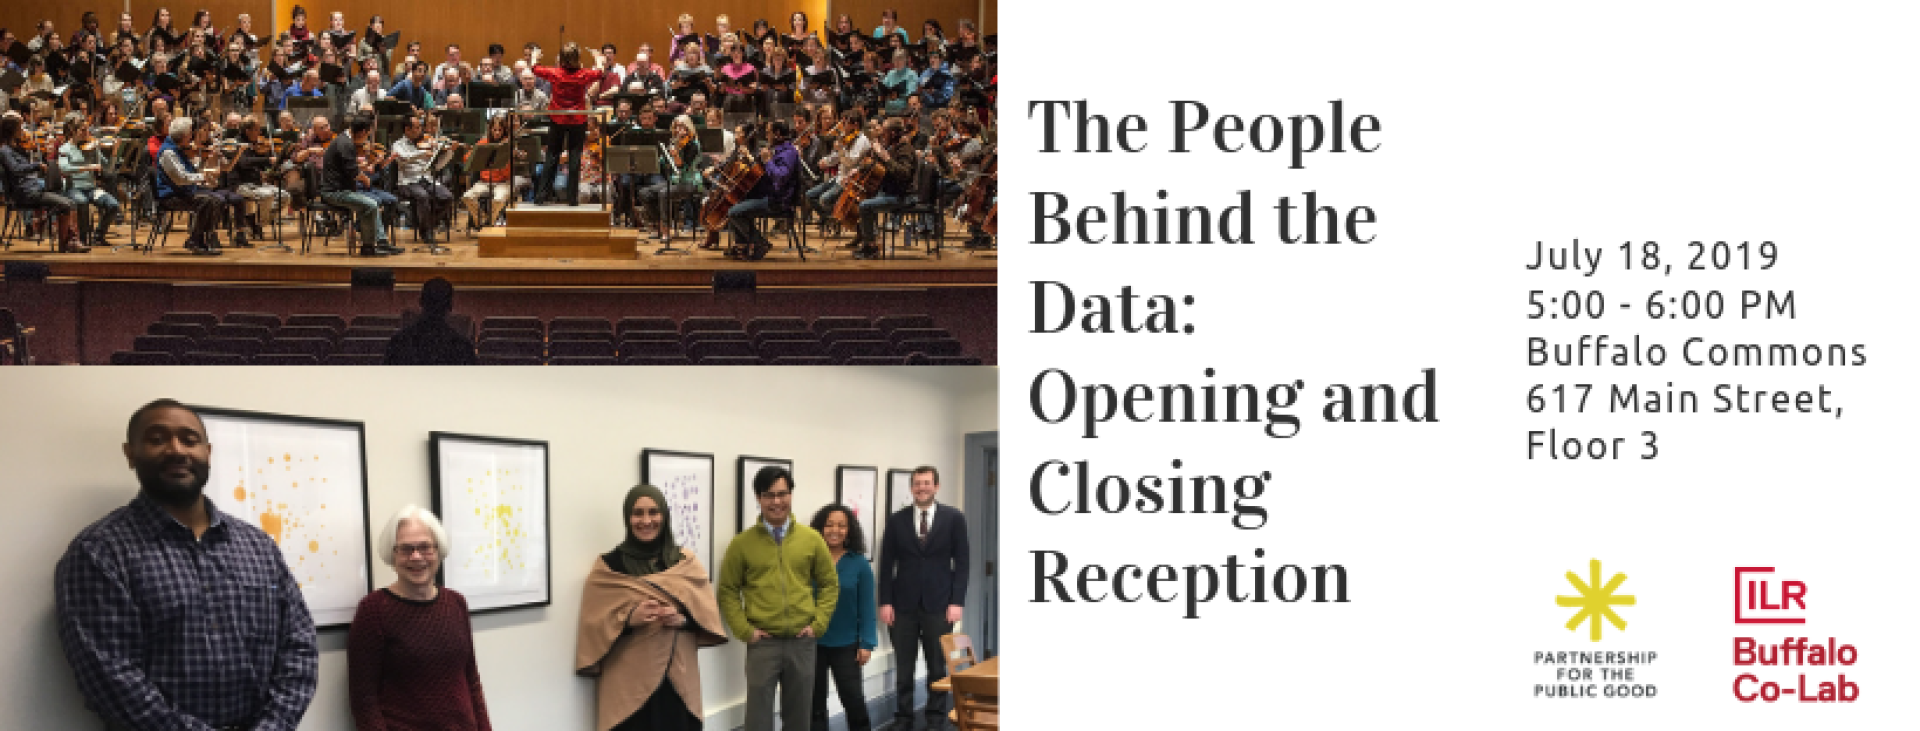 The People Behind the Data: Opening and Closing Reception